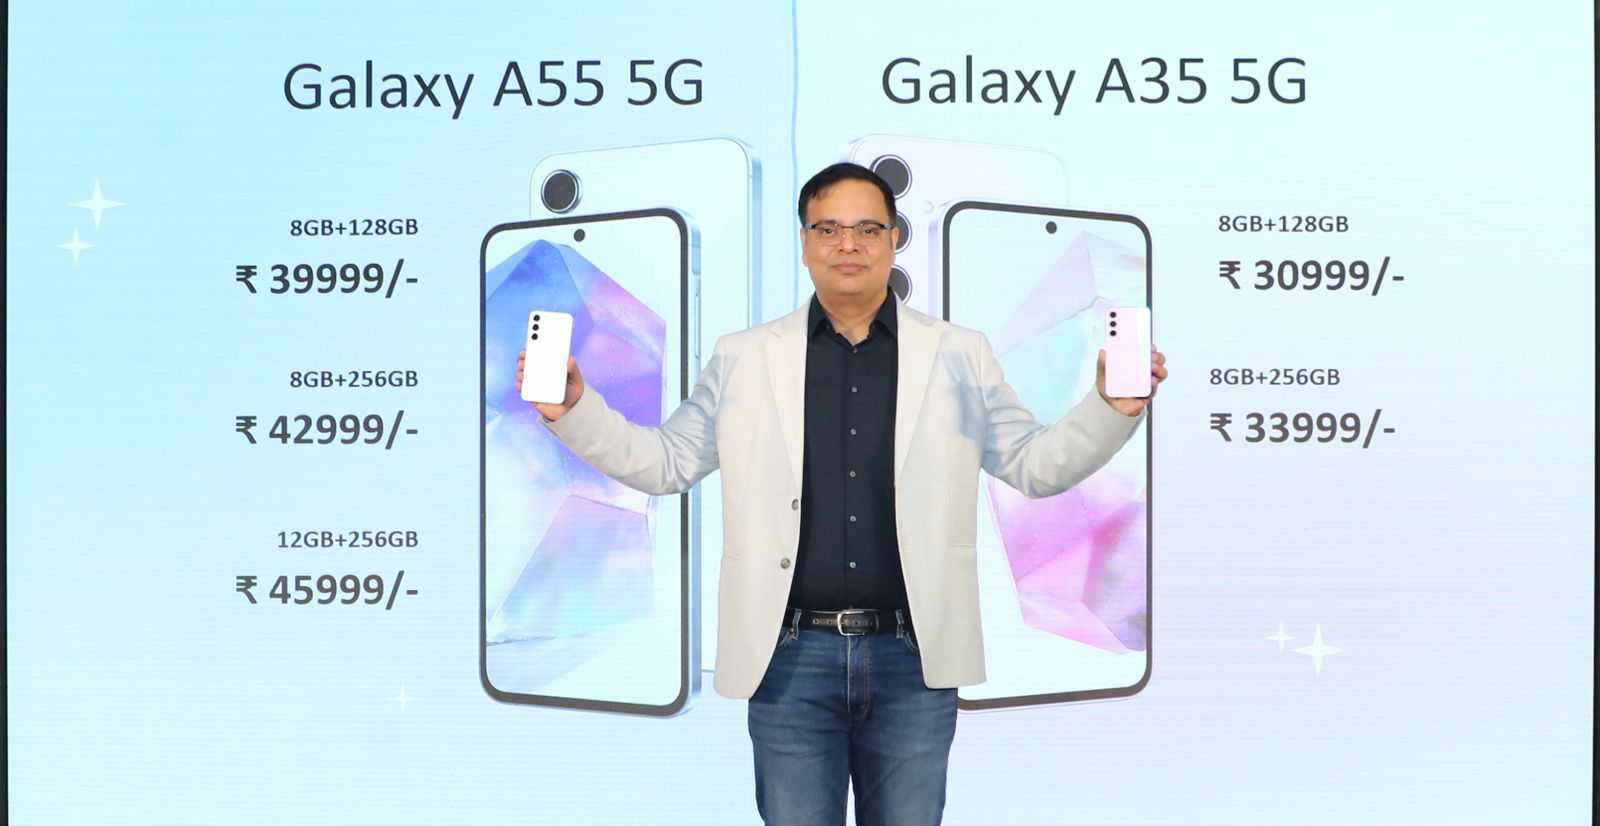 Samsung to further strengthen its position in the mid-premium segment with the launch of Galaxy A55 5G and Galaxy A35 in India